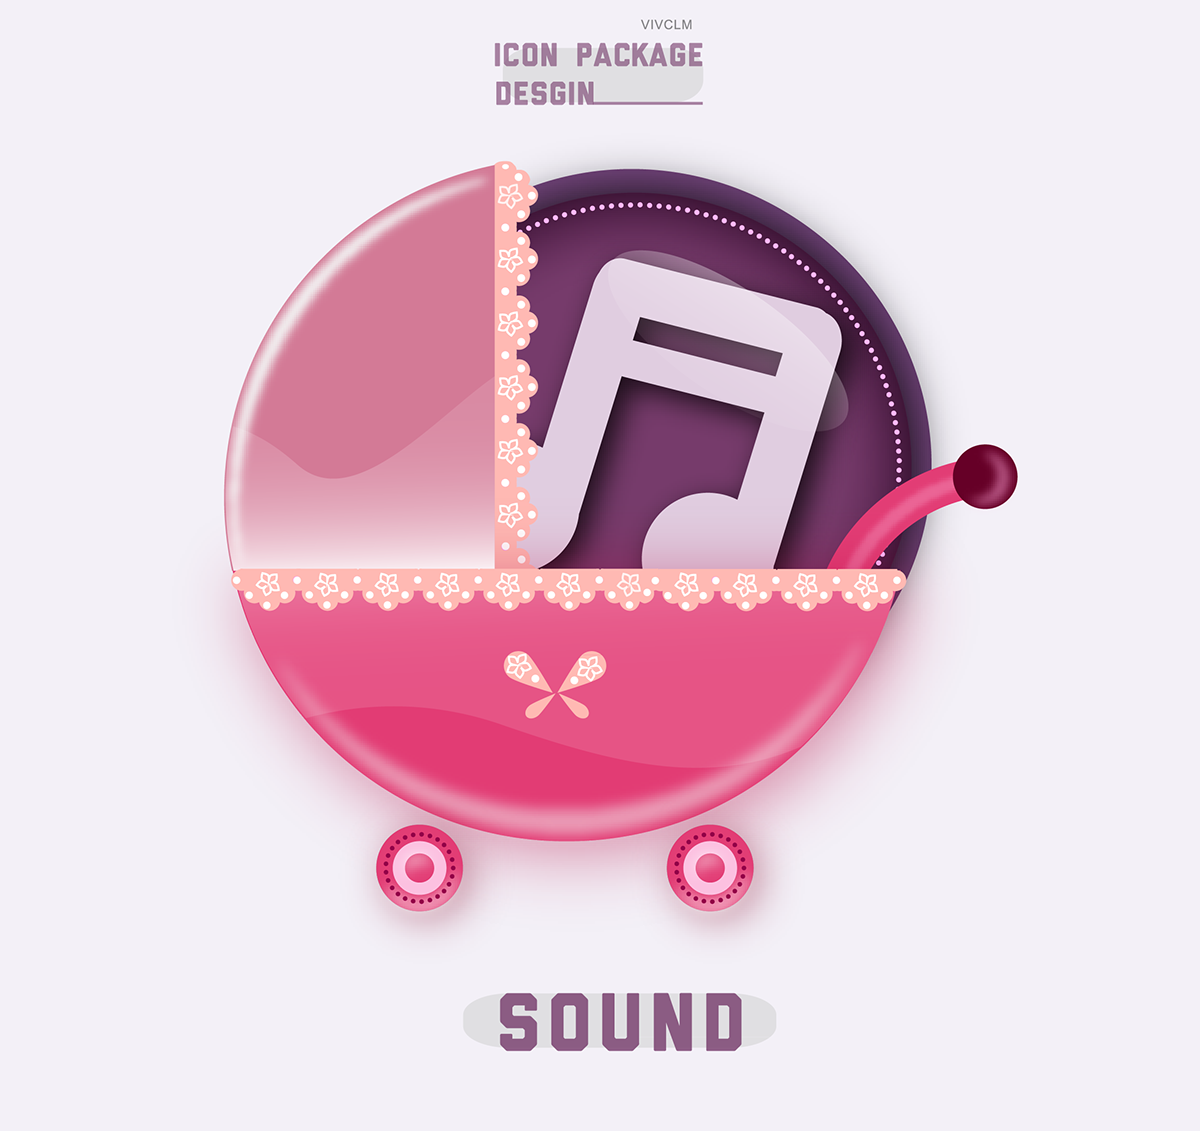 icons design mail home next previous Exit music icon baby trolley babytrolley pink purple lace camera